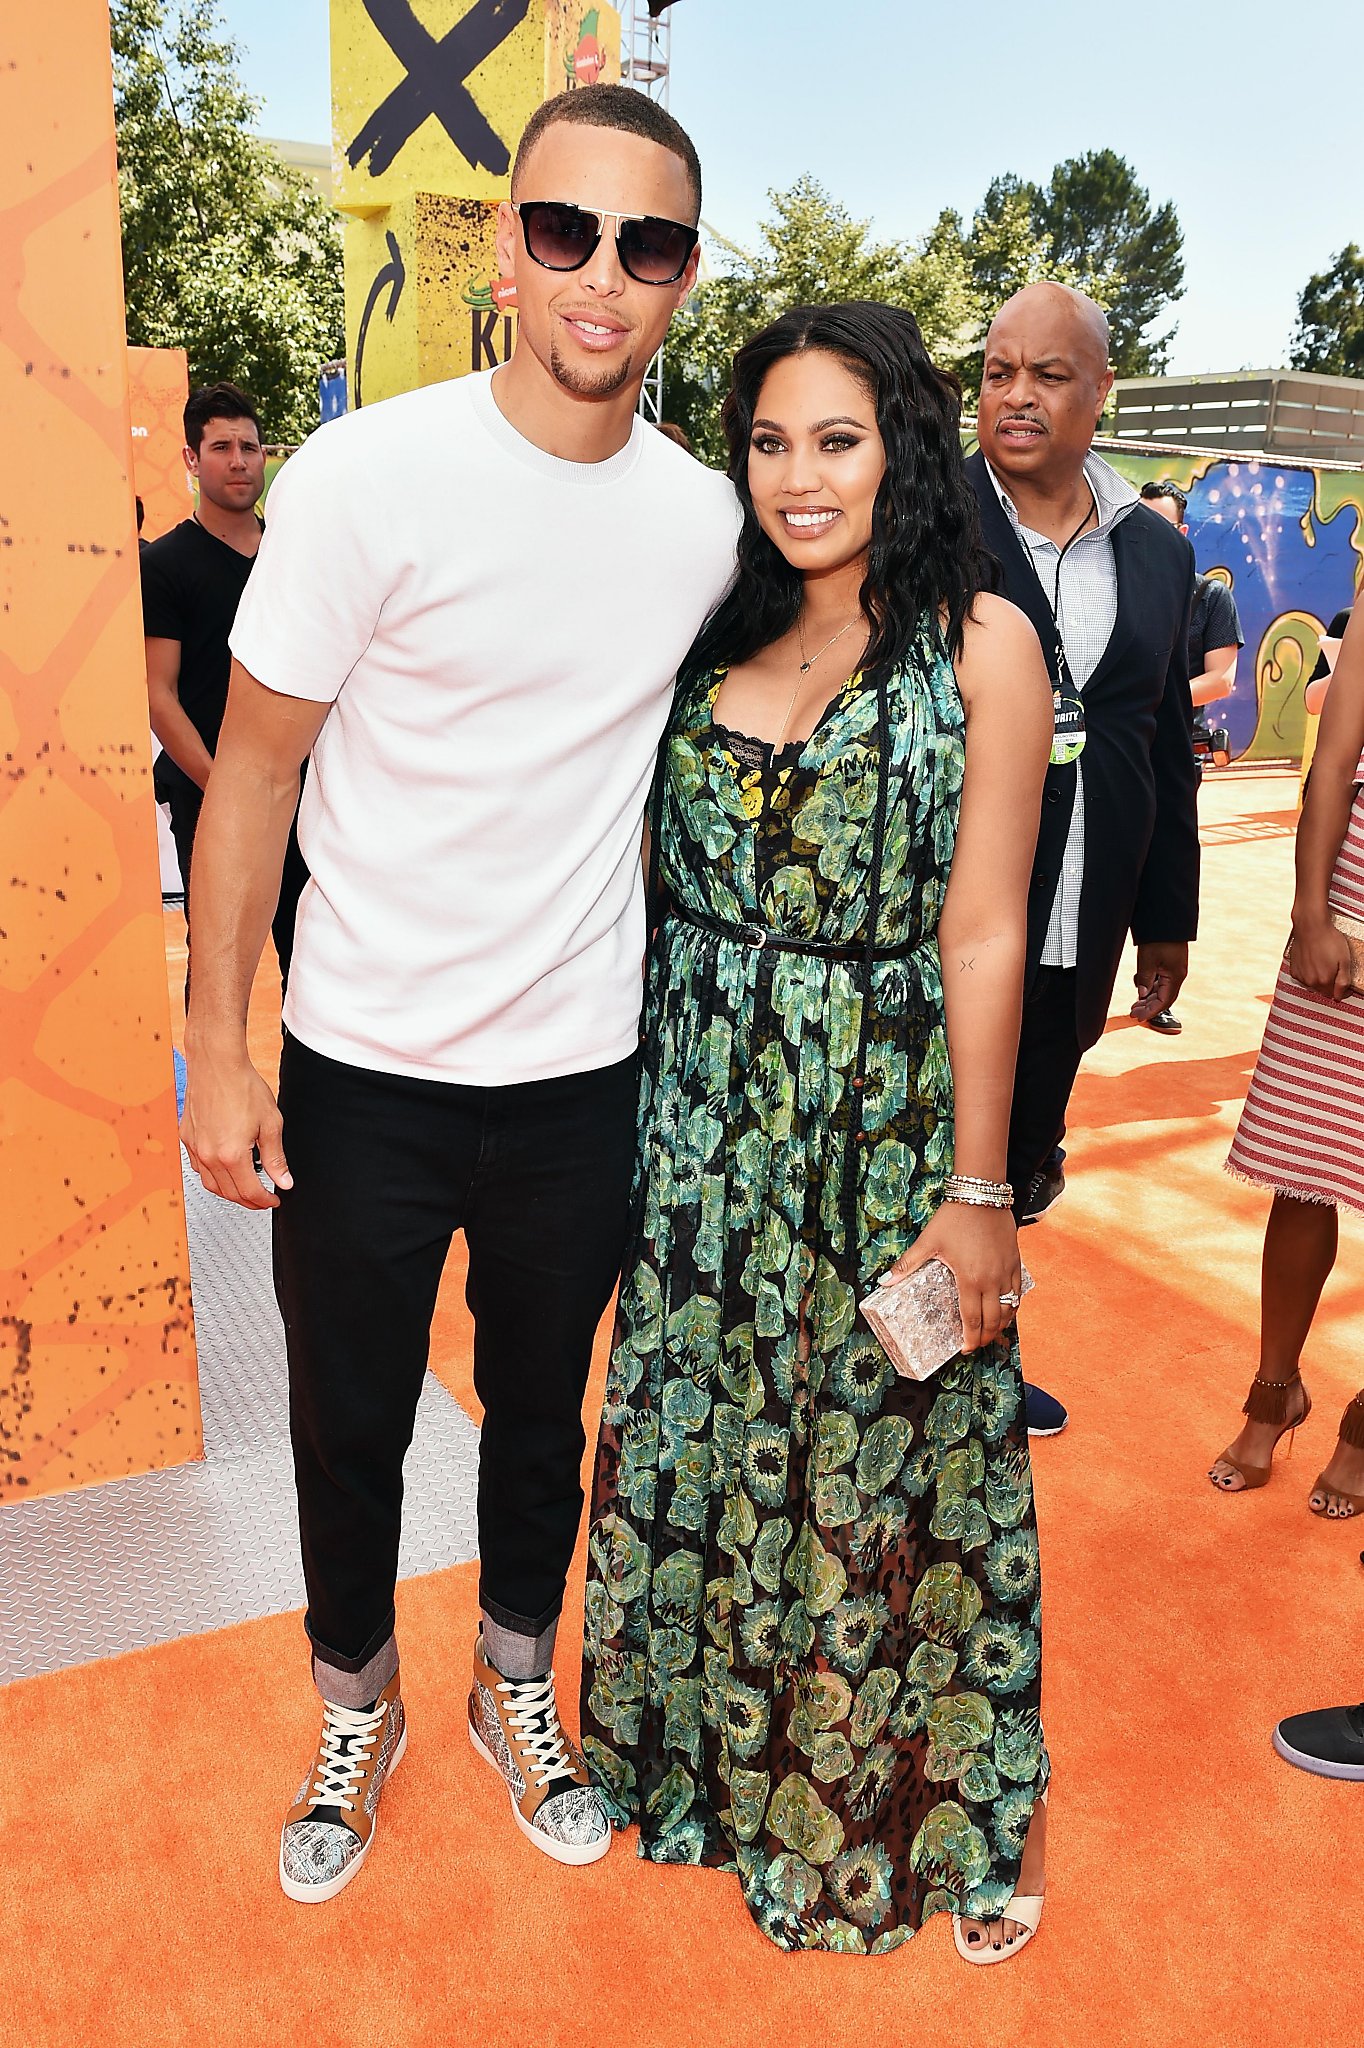 Ayesha Curry says she's been hospitalized 5 times during pregnancy